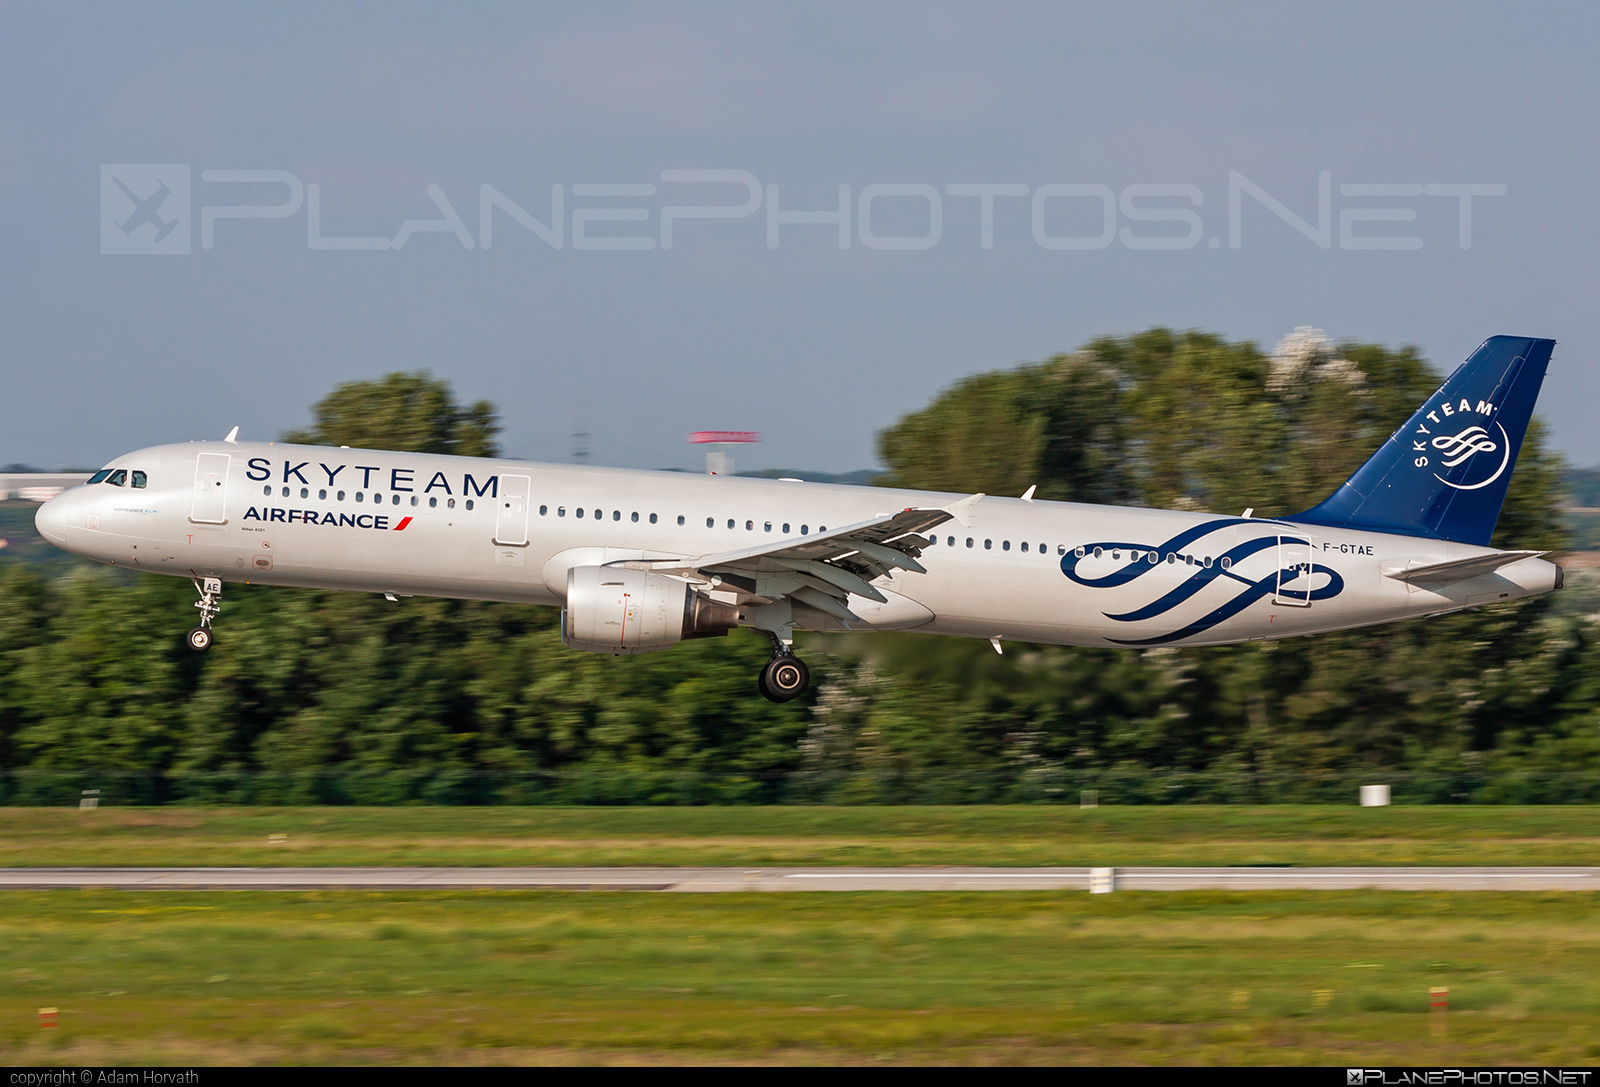 Airbus A321-212 - F-GTAE operated by Air France #a320family #a321 #airbus #airbus321 #airfrance #skyteam